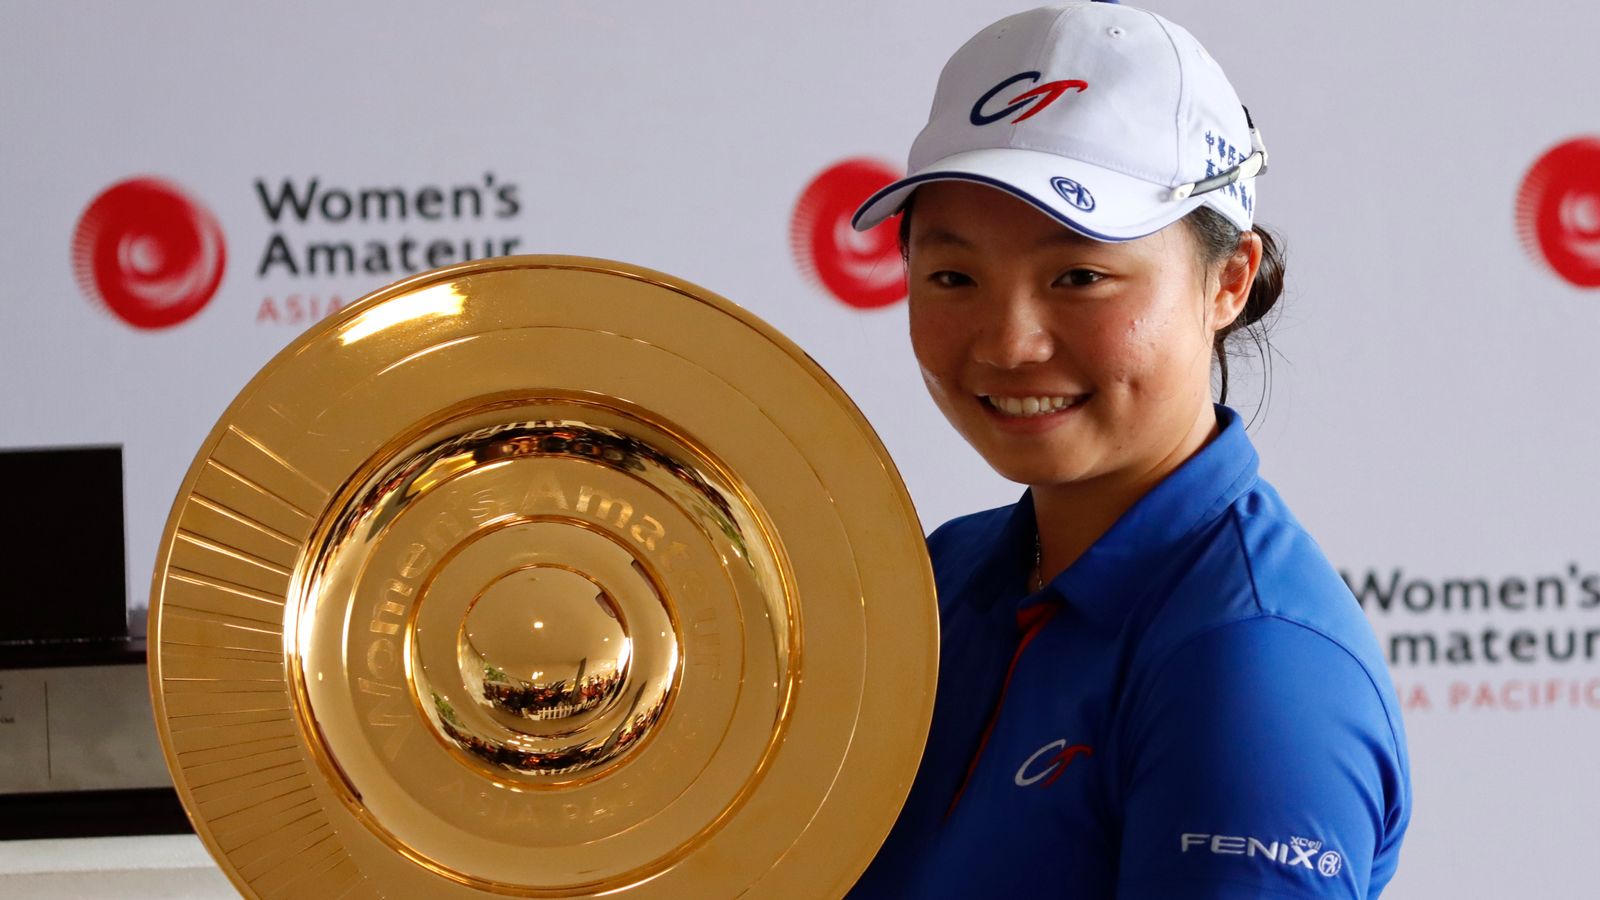 Ting Hsuan Huang Qualifies For Majors After Winning Womens Amateur Asia Pacific Championship 